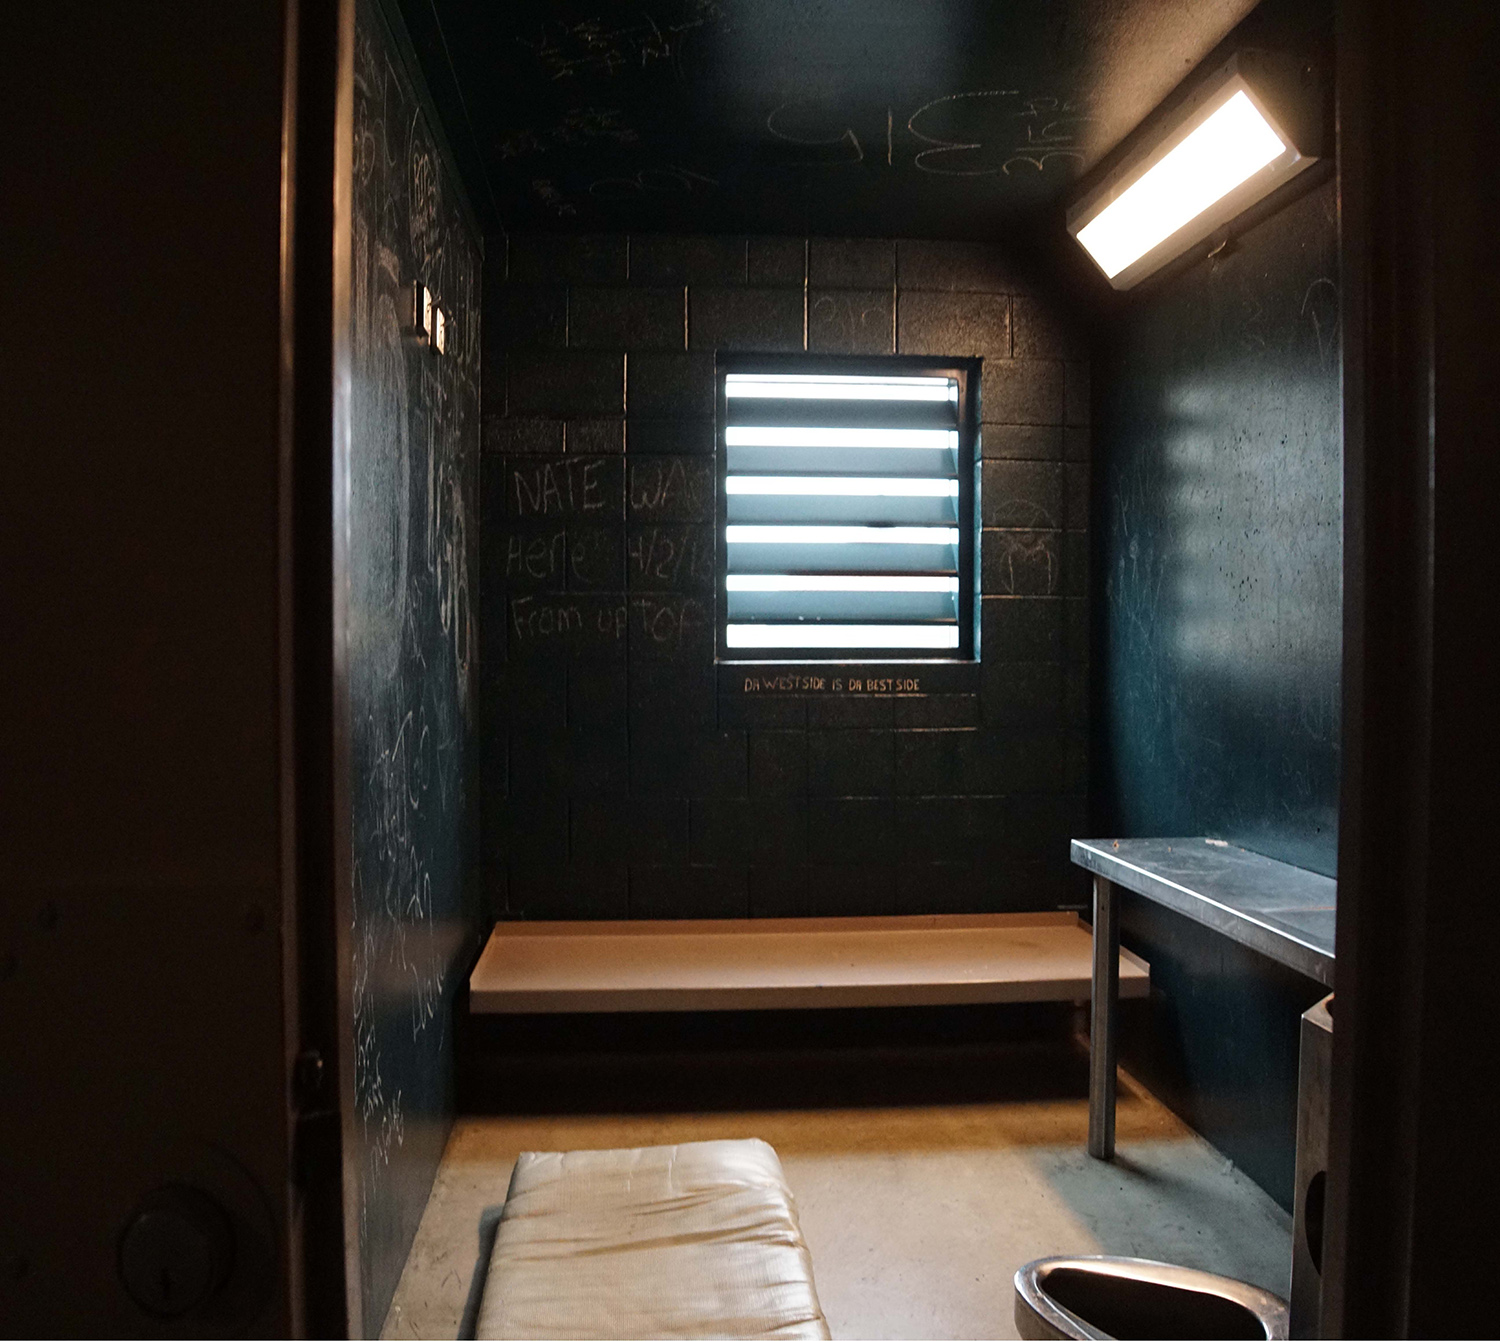 Syracuse solitary cell